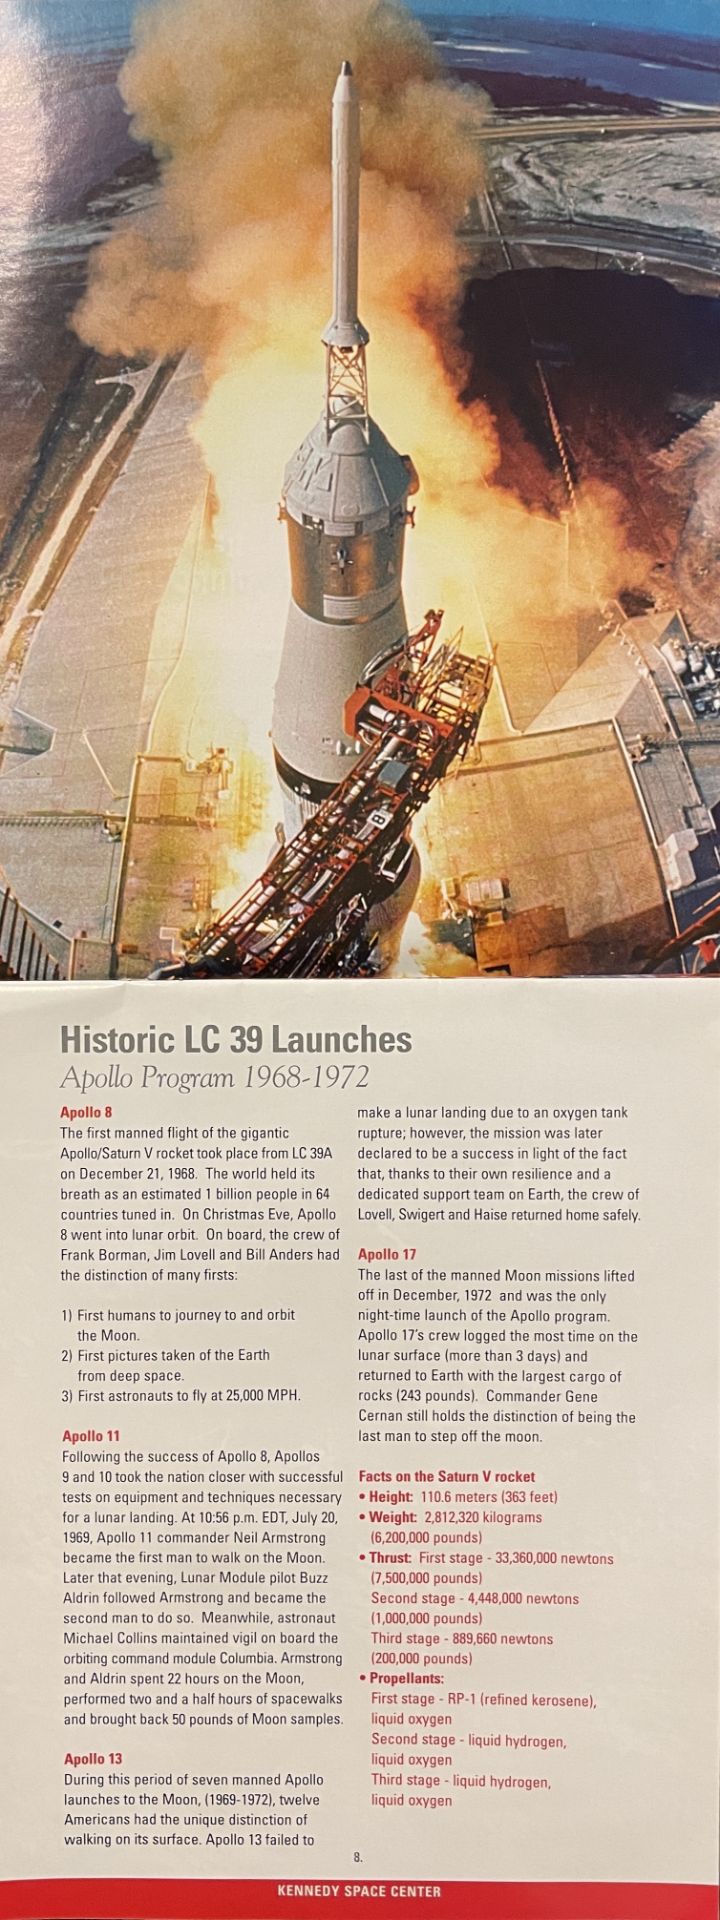 NASA "Guided Tours" Kennedy Space Center Advertisment - Image 5 of 7